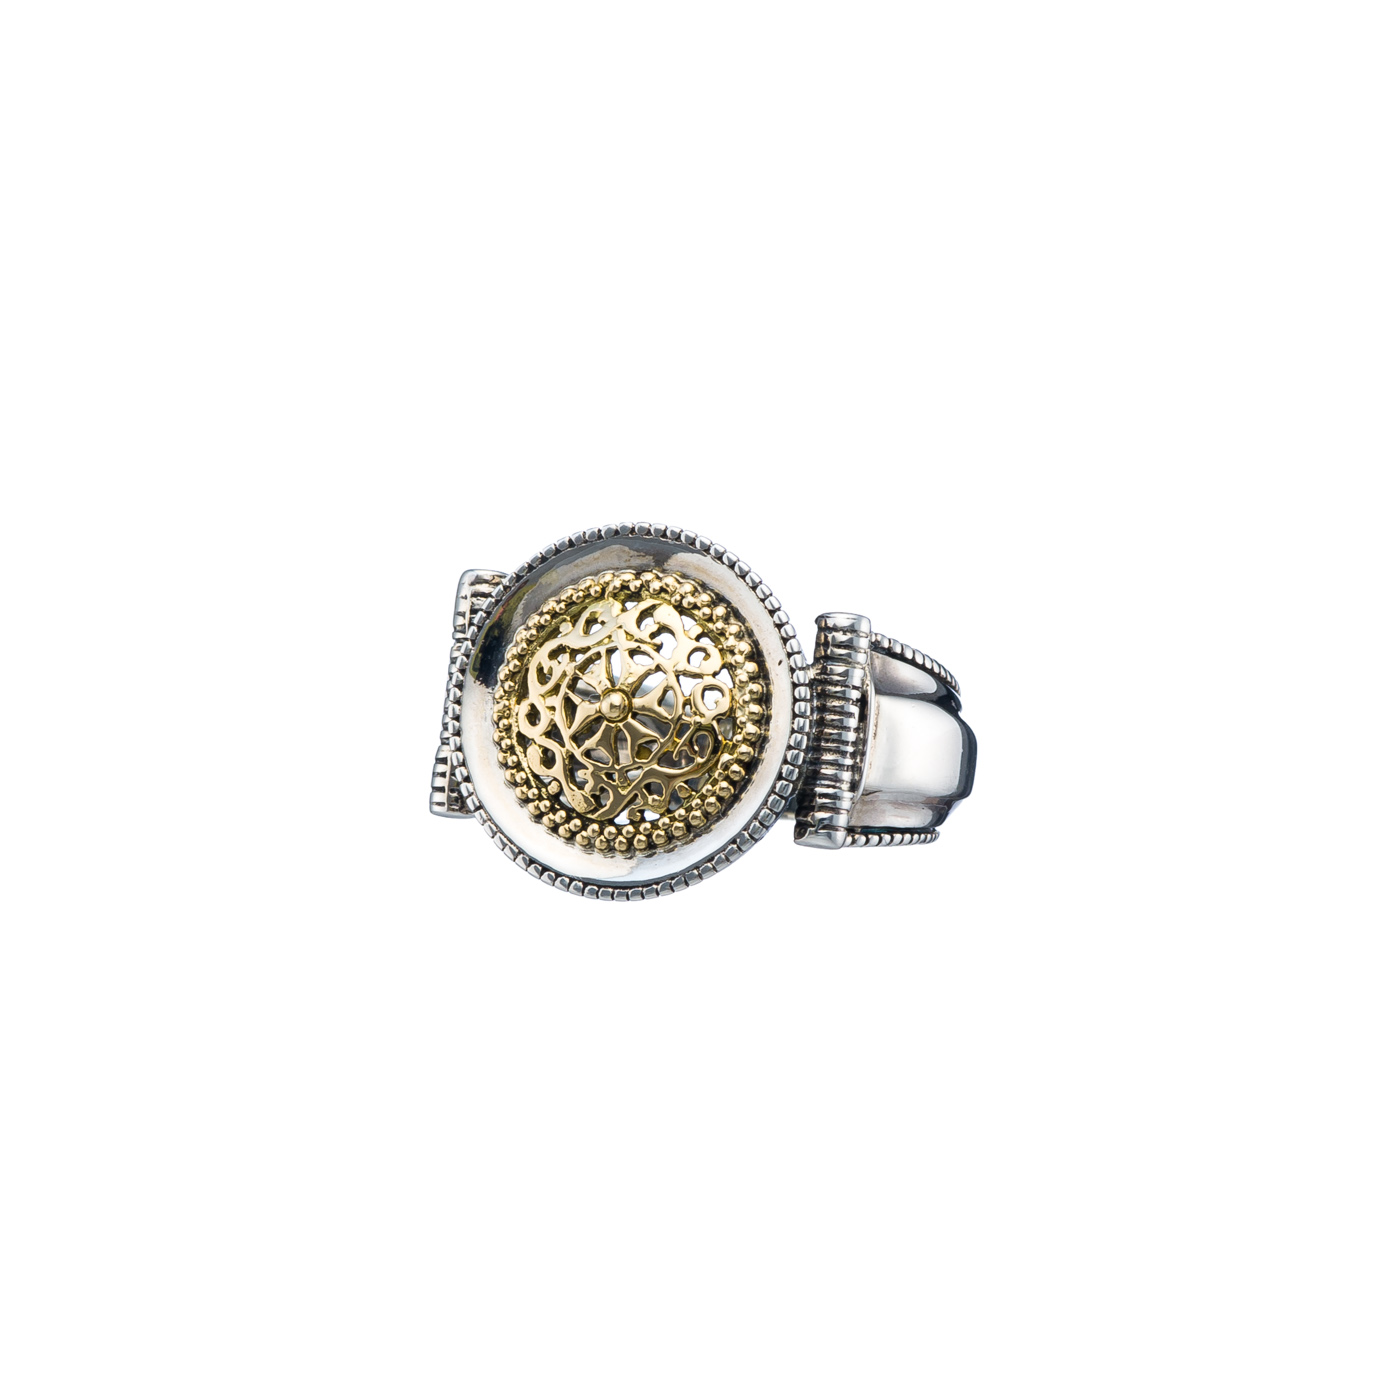 Classic round ring in 18K Gold and Sterling Silver